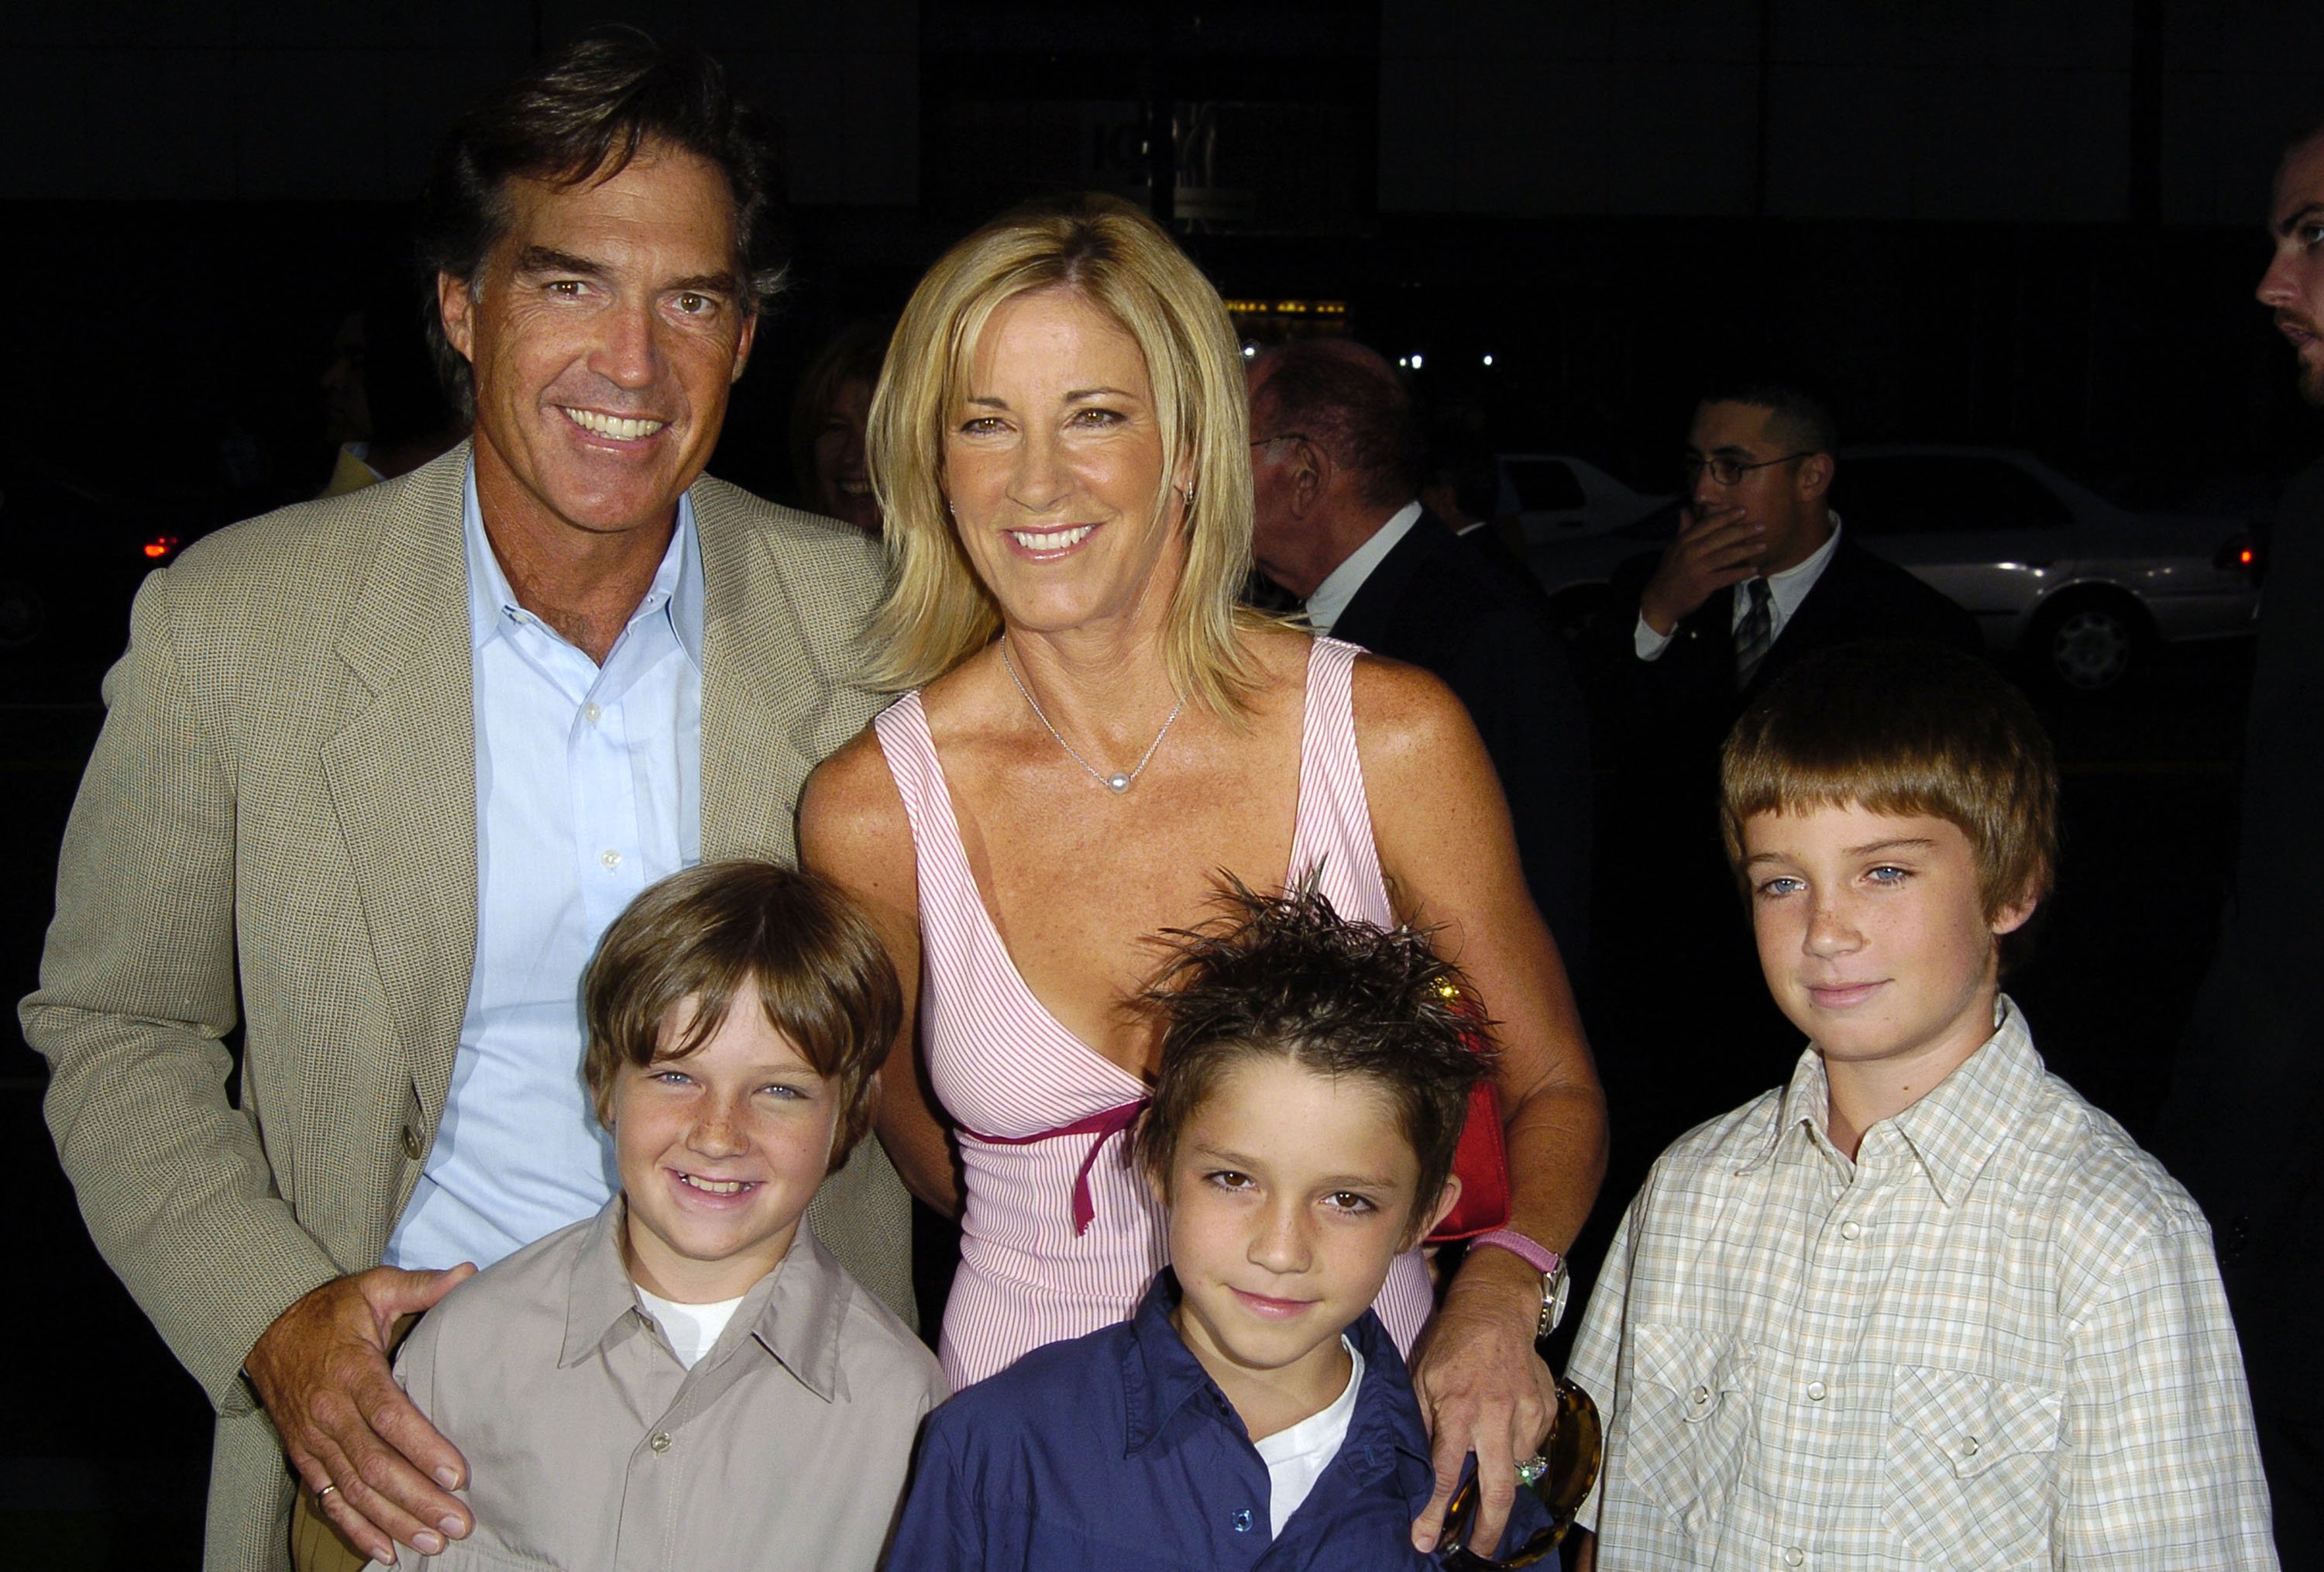 Andy Mills, Chris Evert and family at the "Wimbledon" world premiere in Beverly Hills, California, on September 13, 2004. | Source: Getty Images